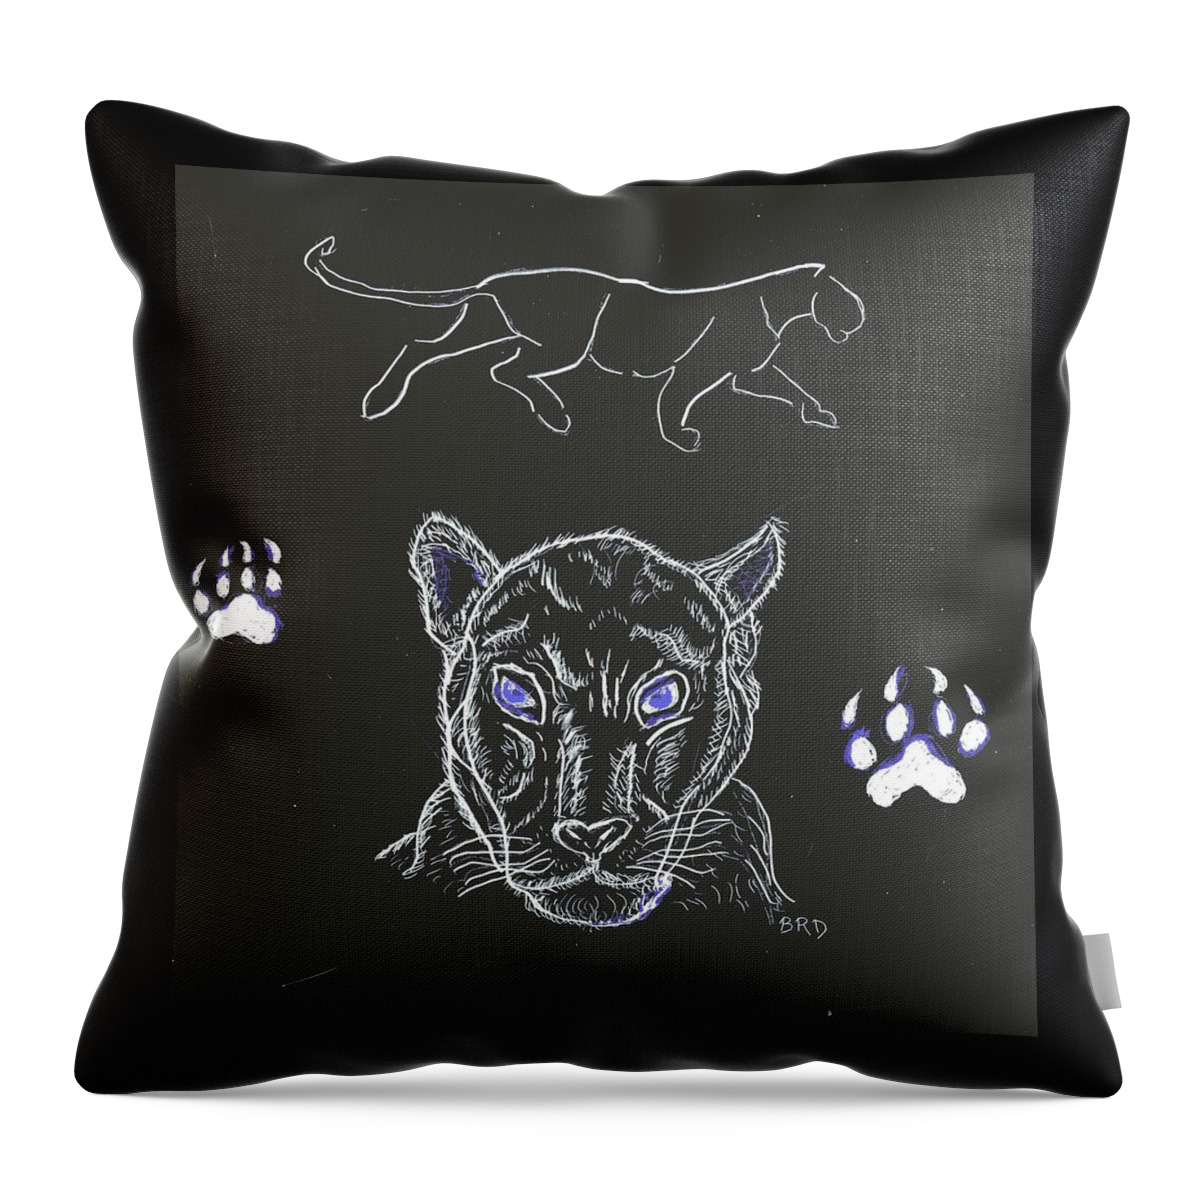 Panther Throw Pillow featuring the drawing Black Panther by Branwen Drew